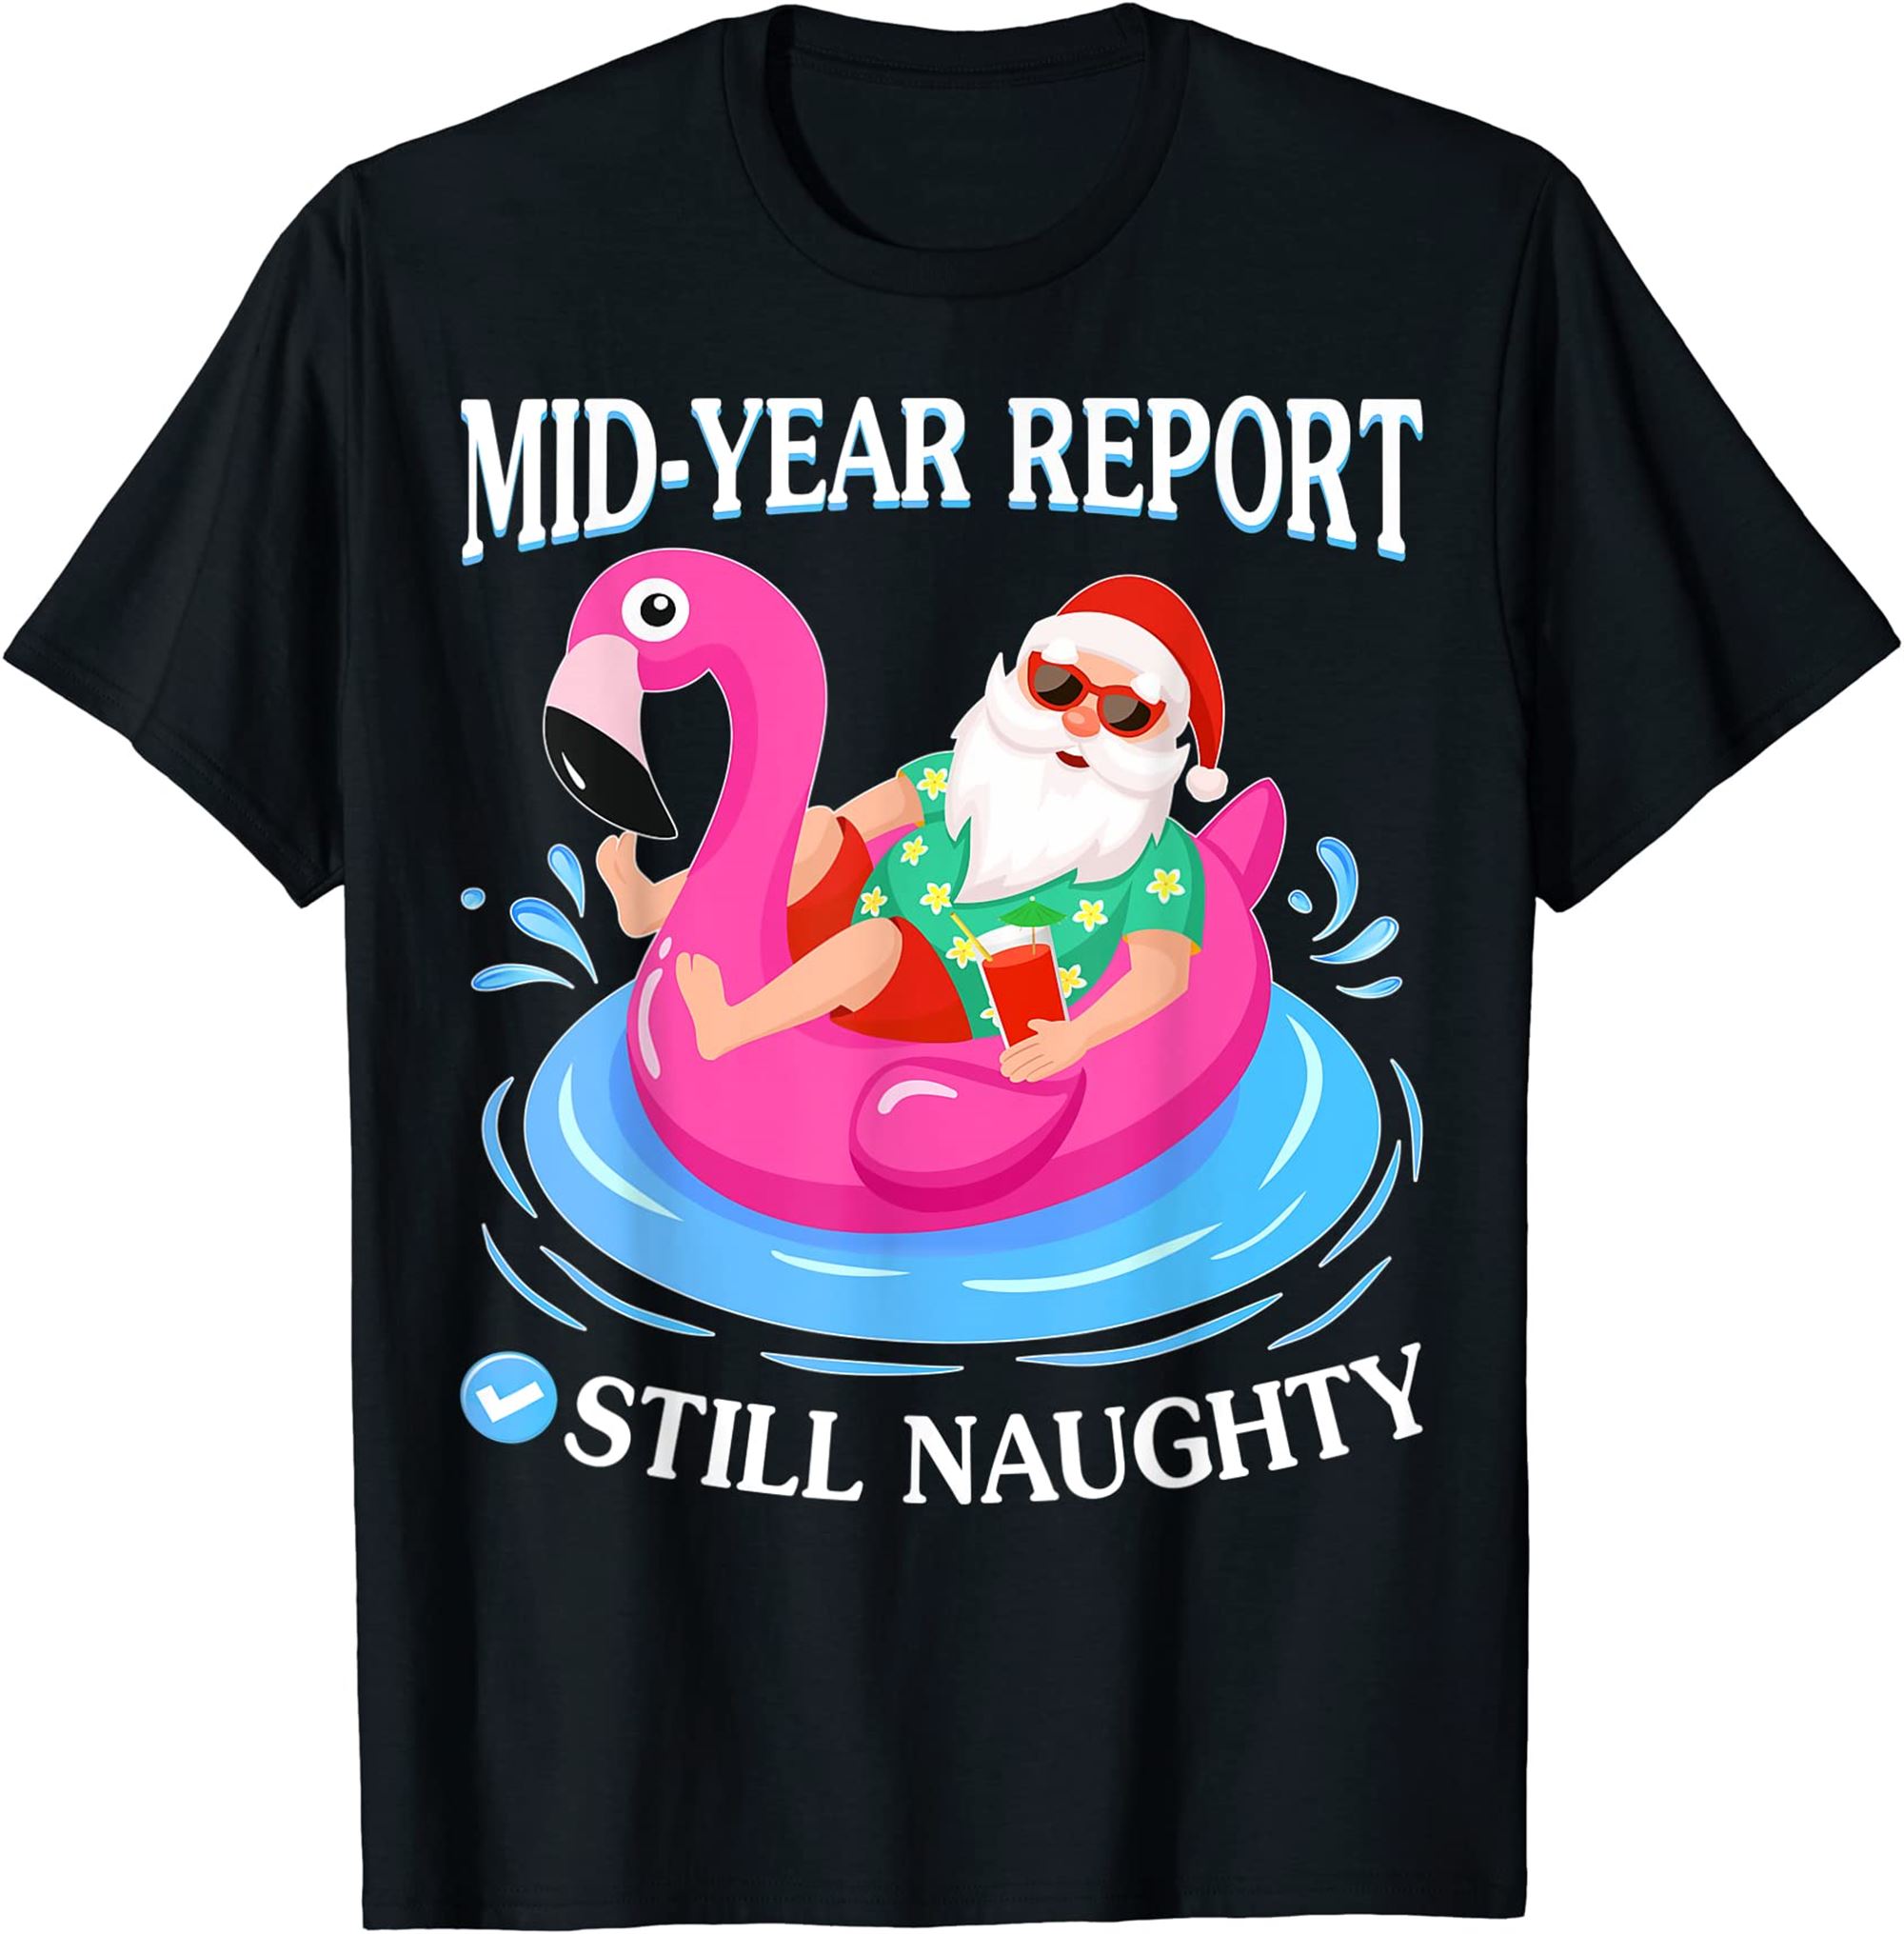 Christmas In July Mid Year Report Still Naughty Santa T-shirt Full Size Up To 5xl